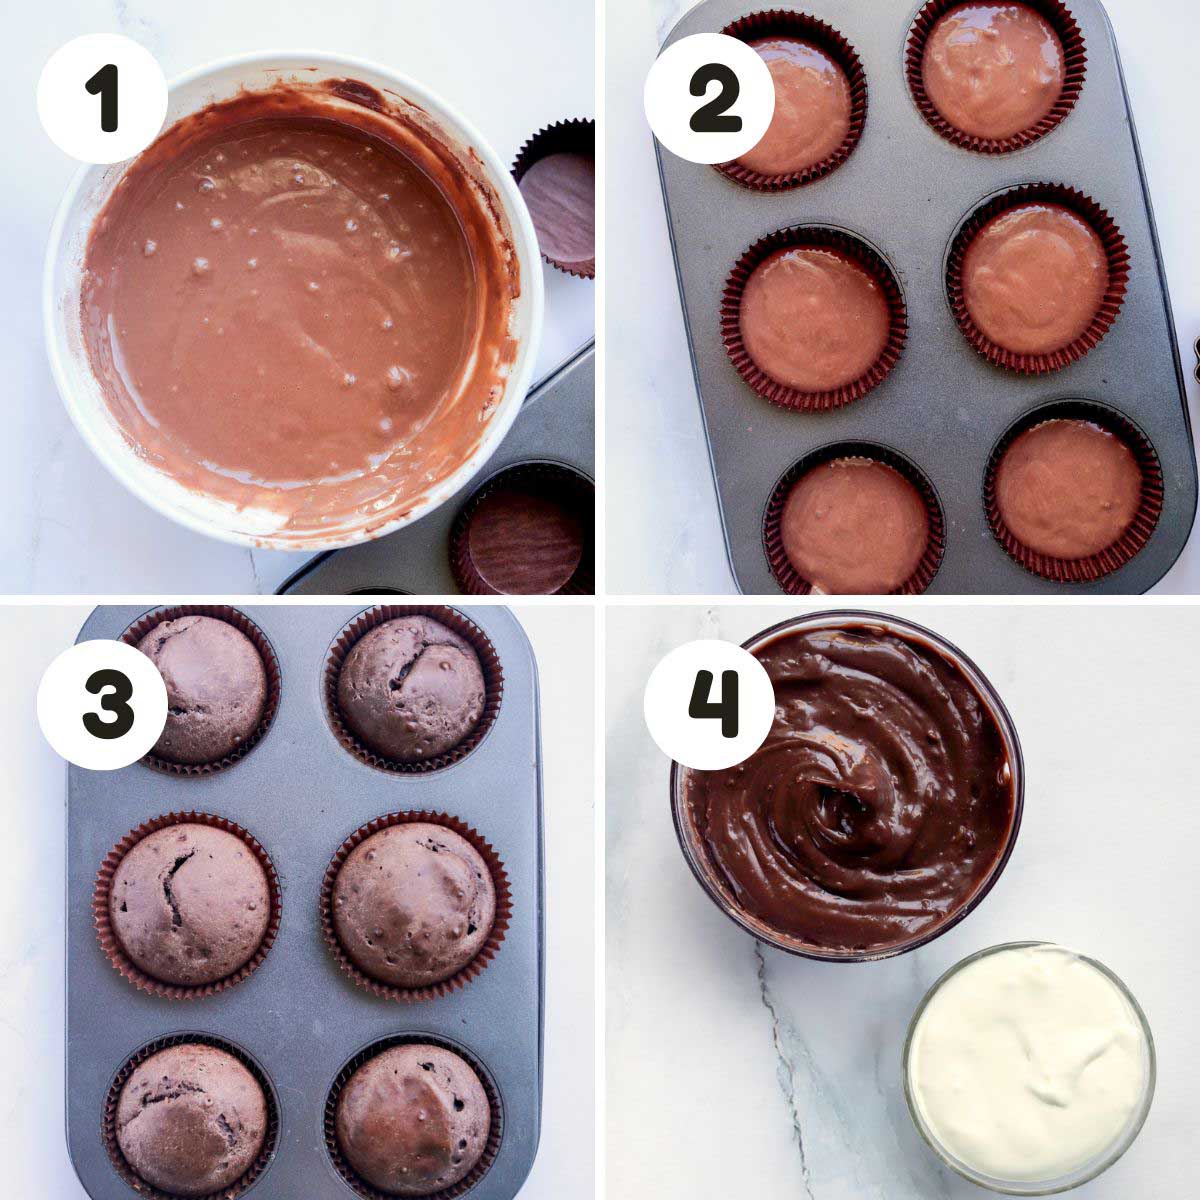 Steps to make the chocolate cupcakes.